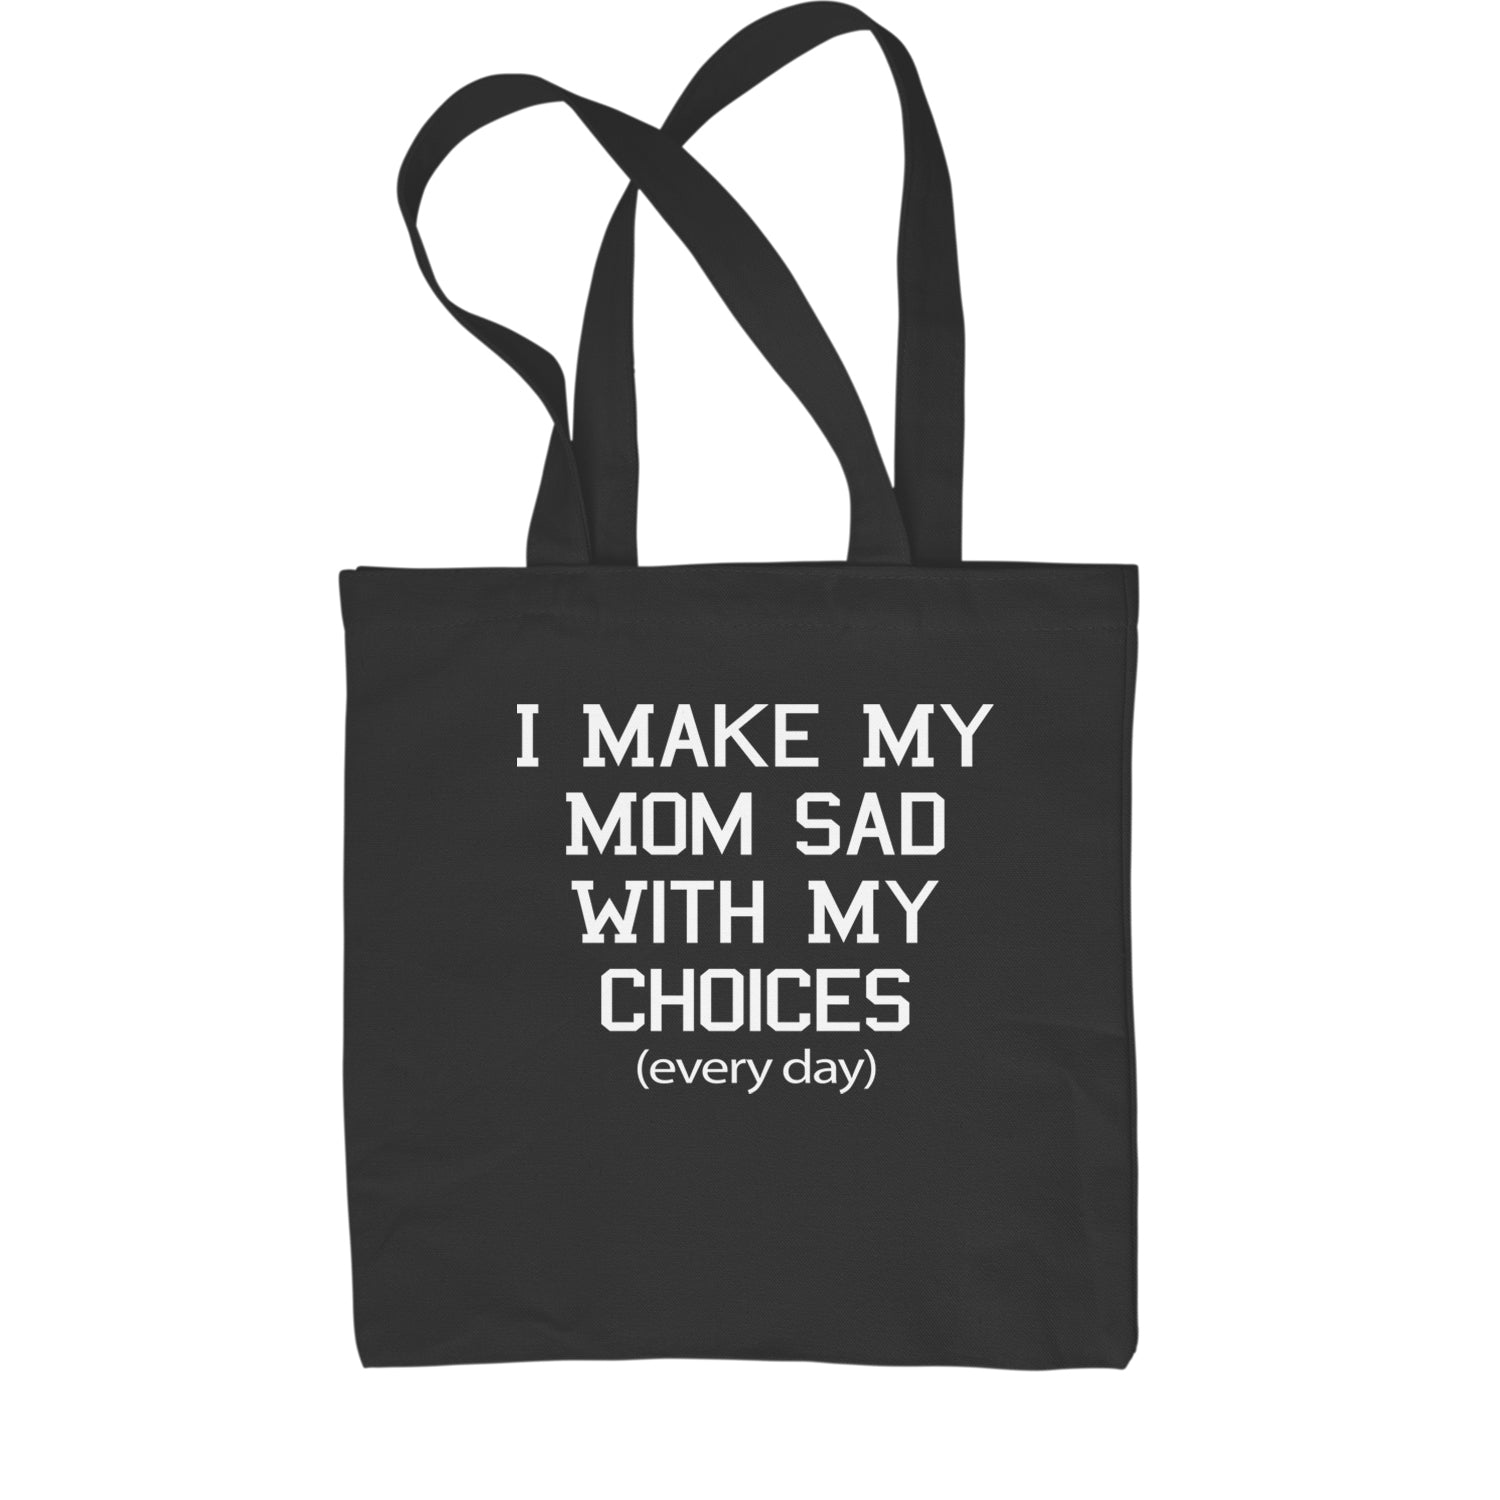 I Make My Mom Sad With My Choices Every Day Shopping Tote Bag funny, ironic, meme by Expression Tees